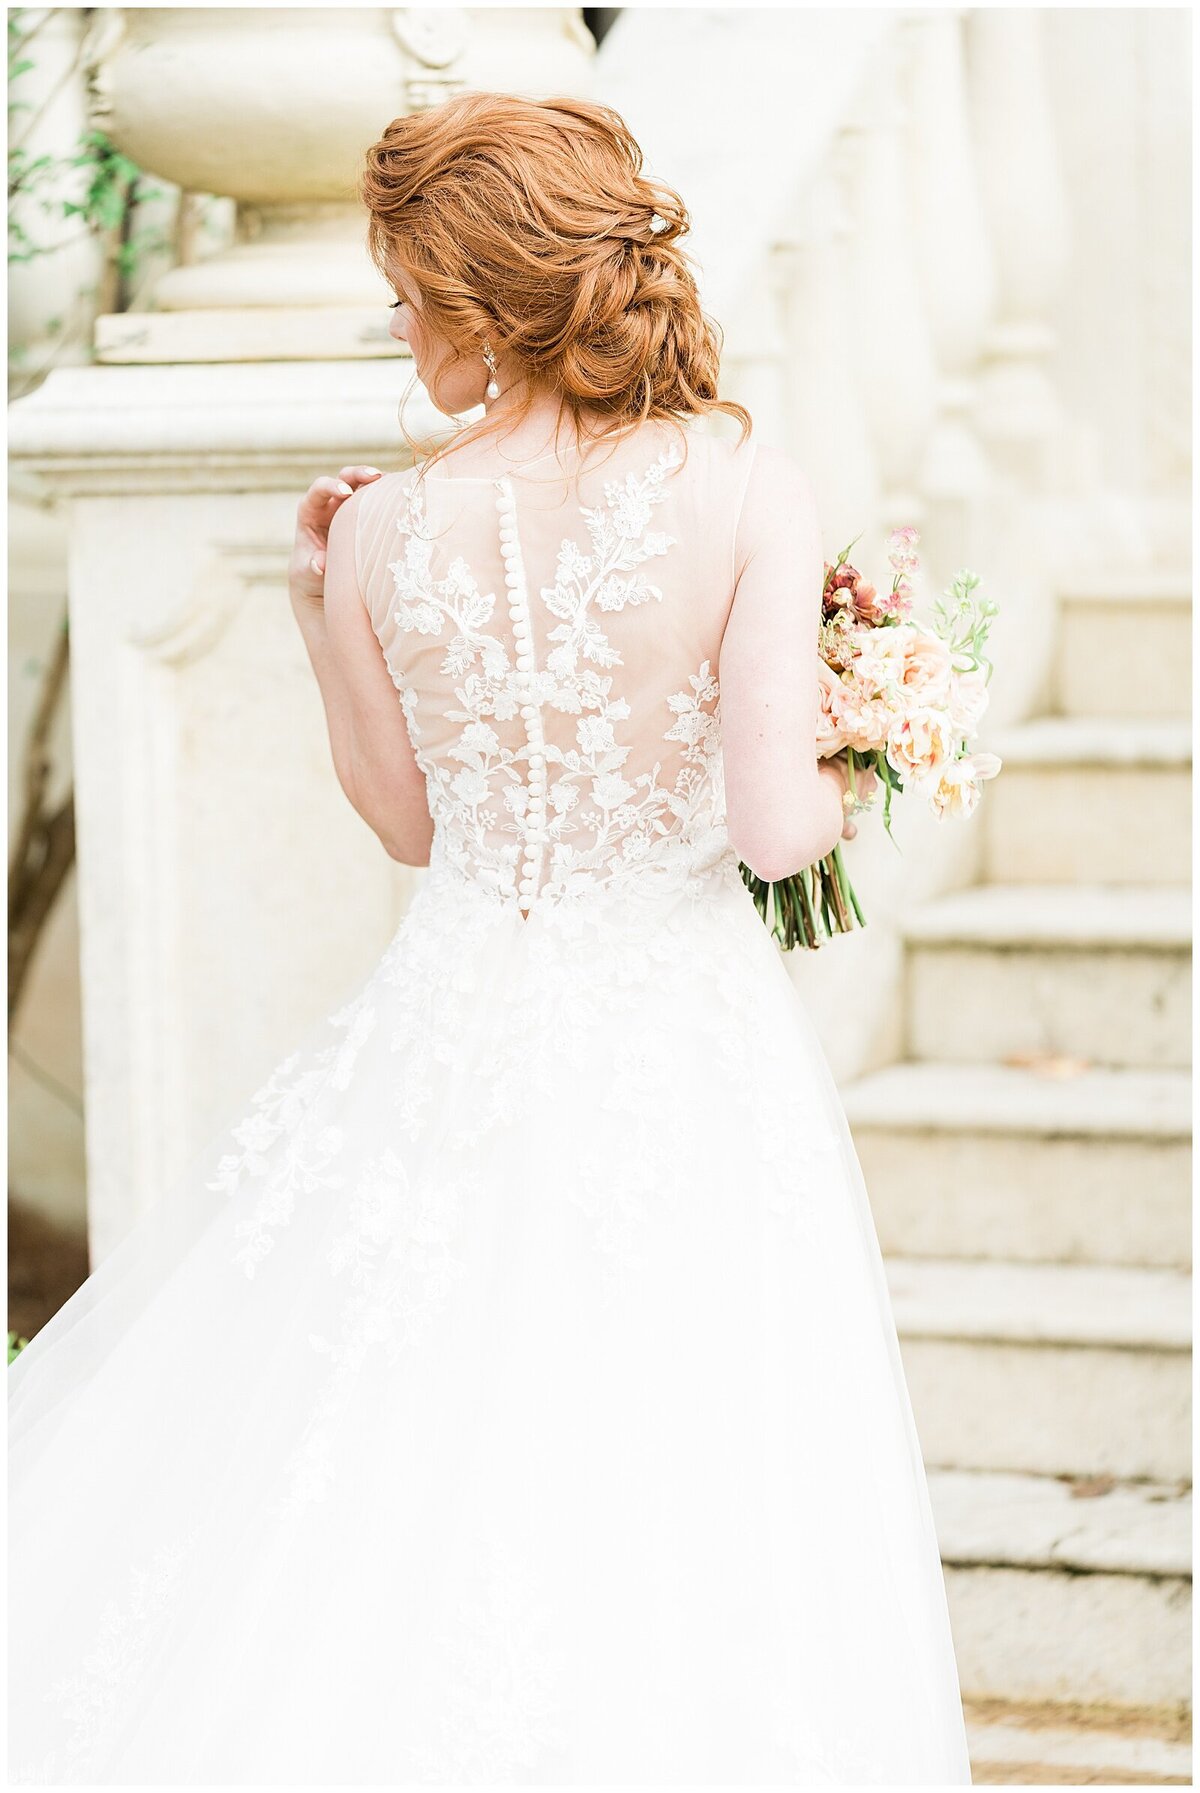 Bride with red hair in dress with lace back